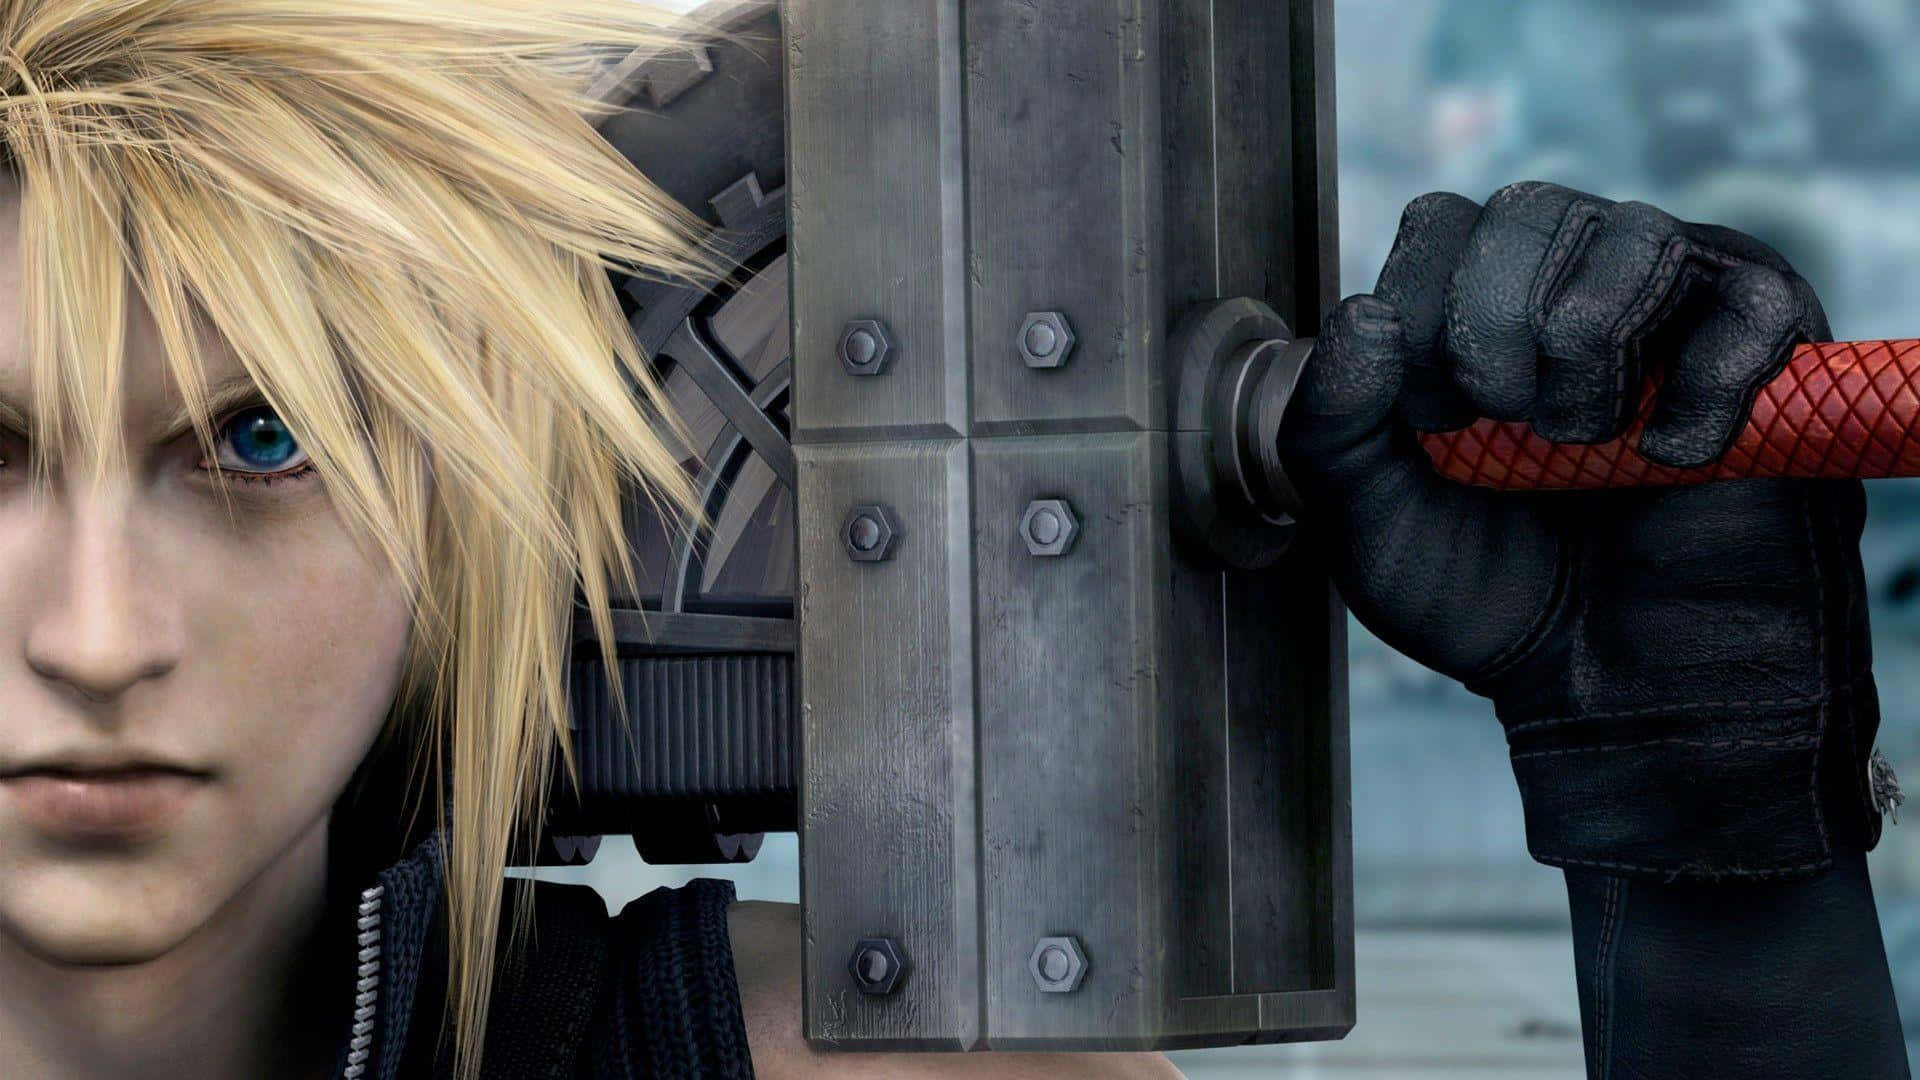 Cloud Strife - The Warrior Of Final Fantasy Wallpaper